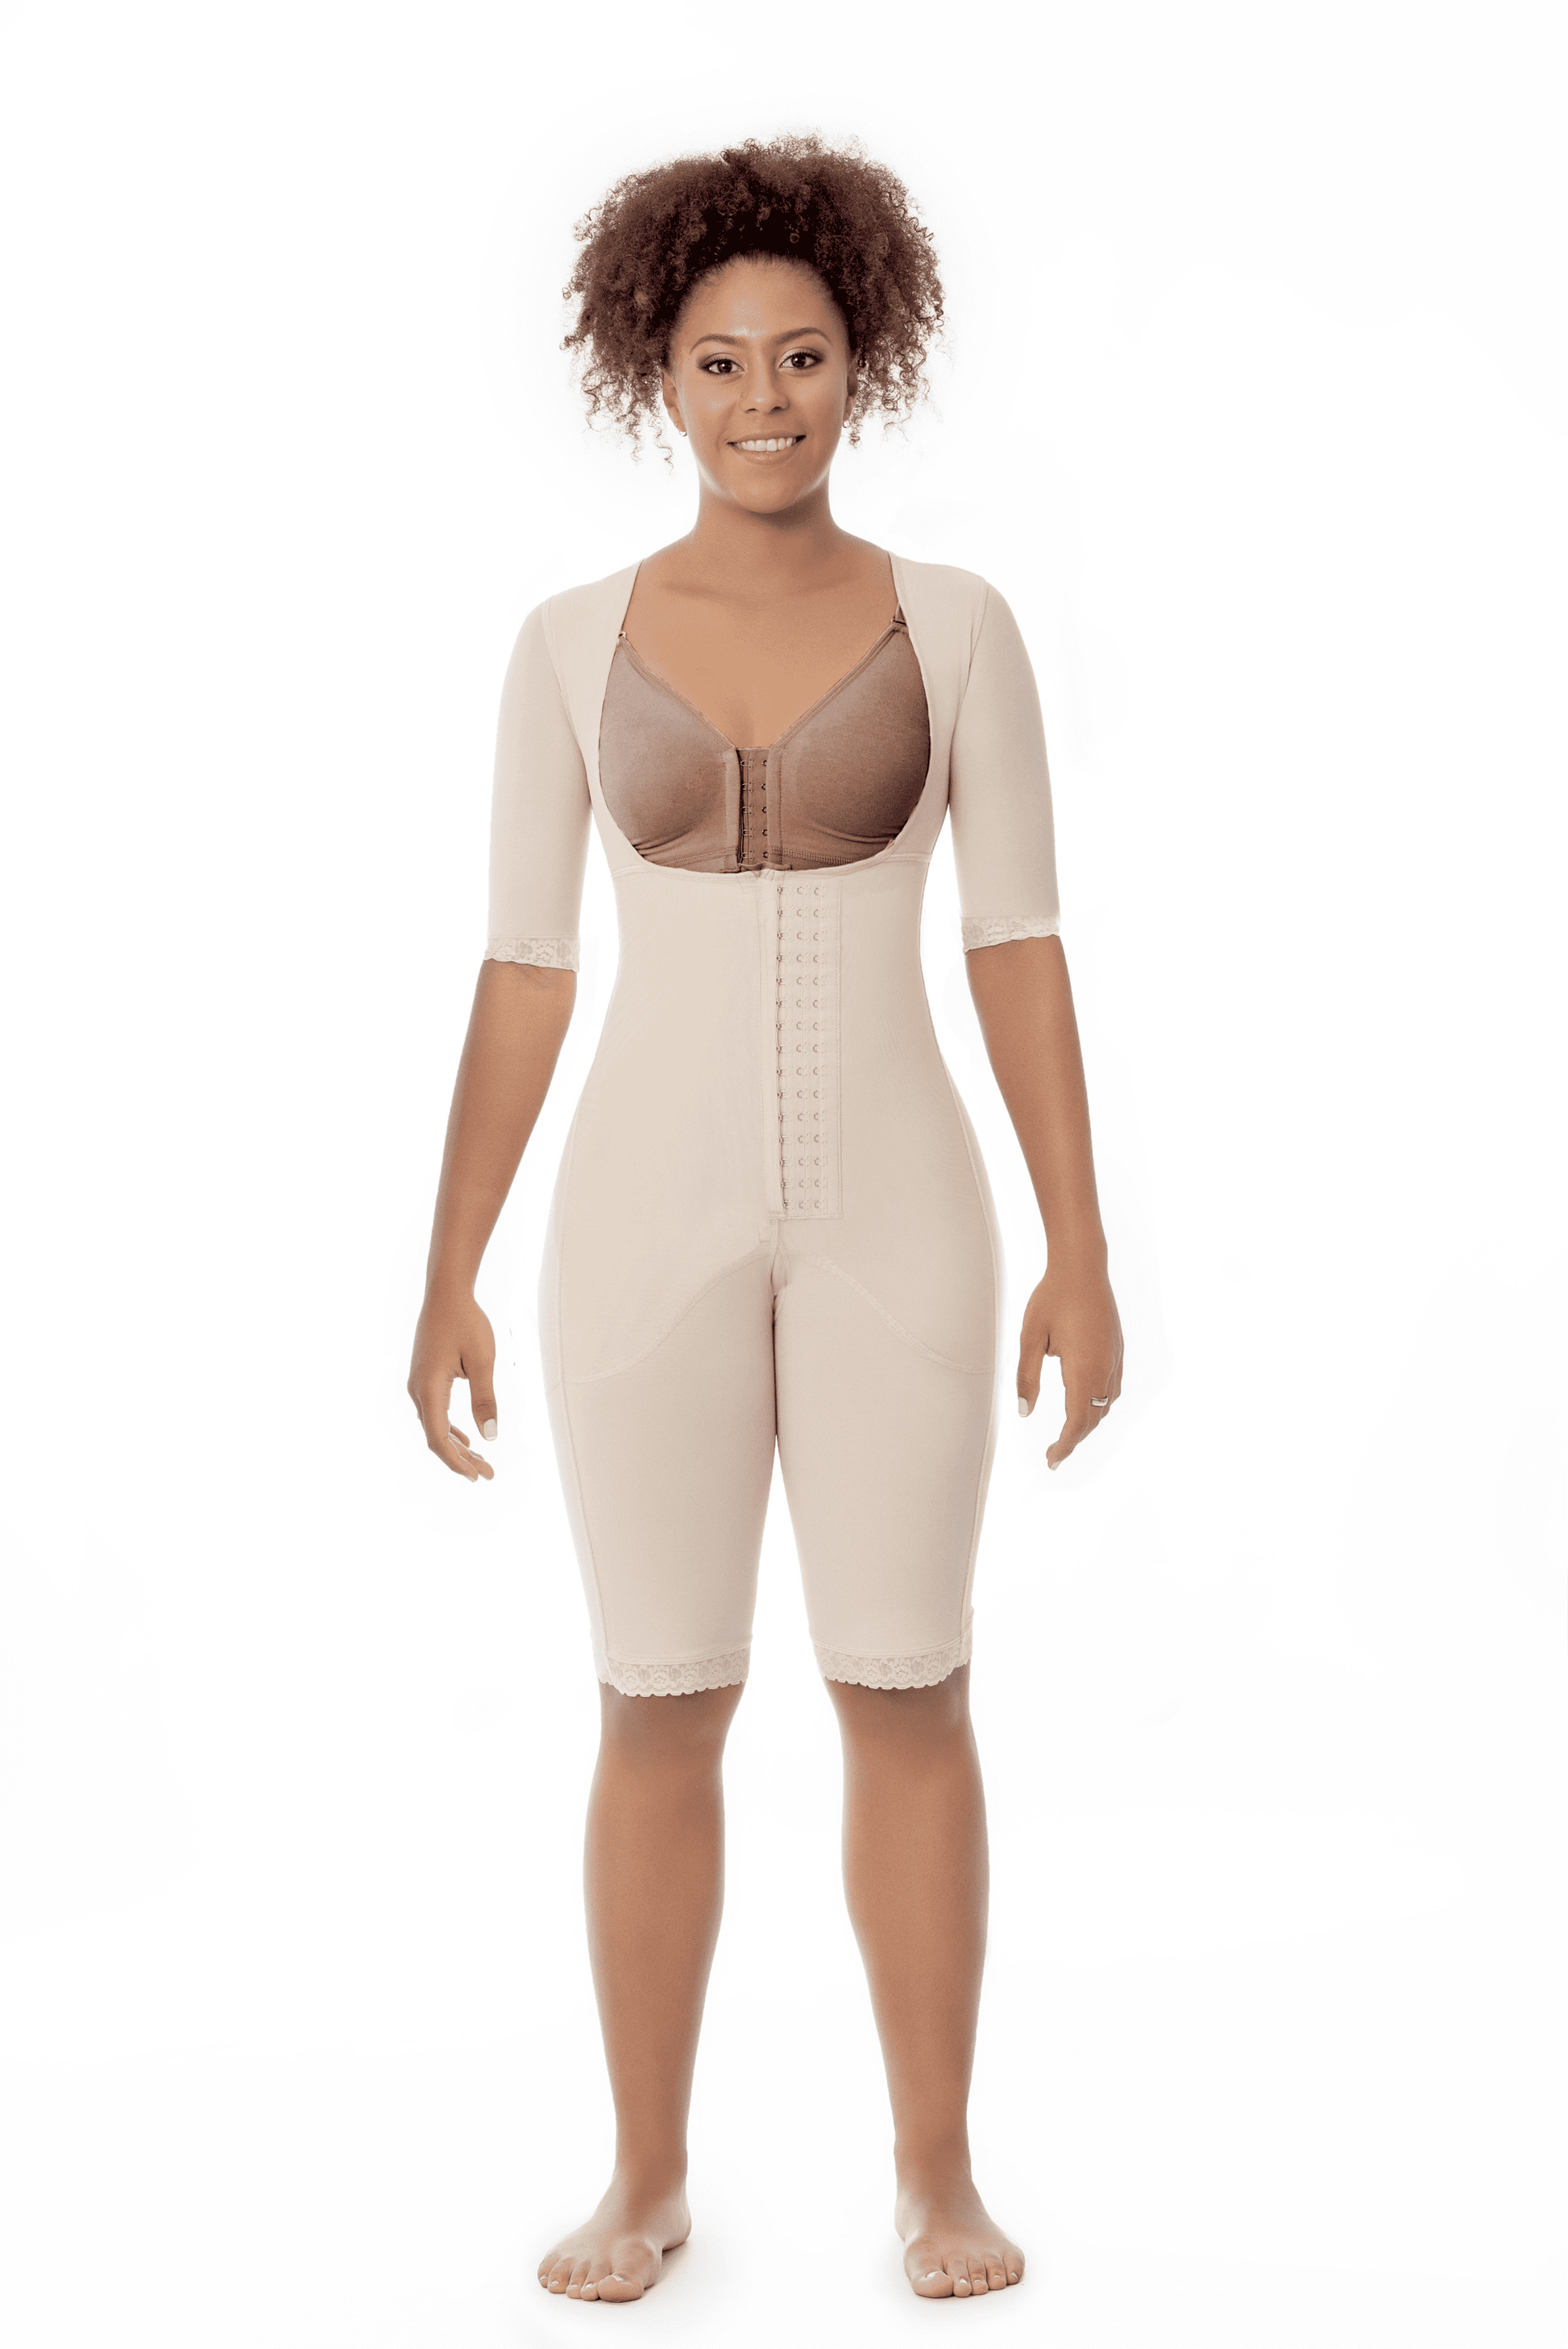 11523 - STAGE 2 BRALESS FULL BODY ABOVE KNEE FAJA WITH SLEEVES